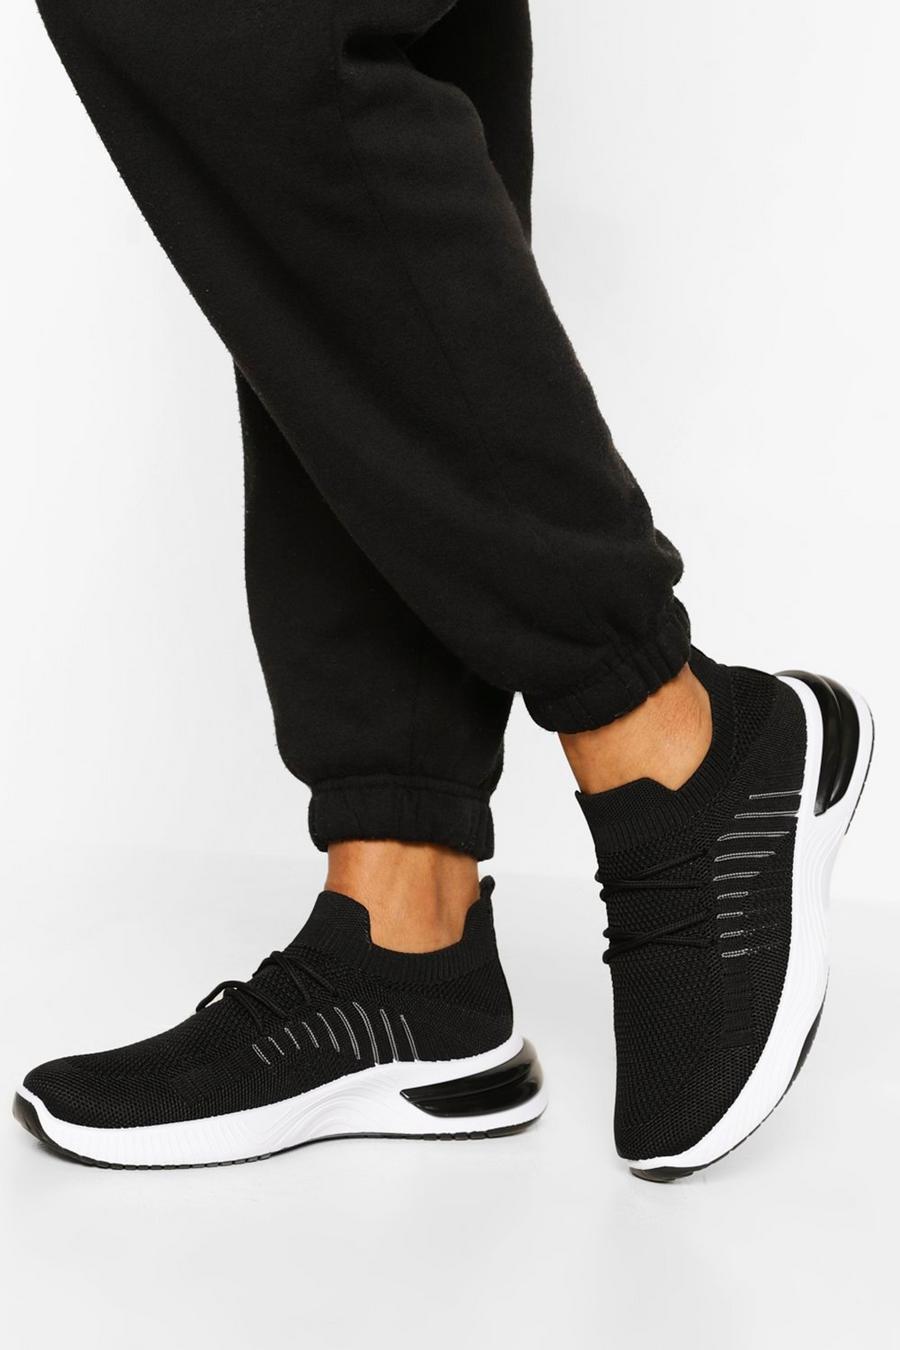 Lace Up Bubble Sole Sports Trainers | Boohoo UK